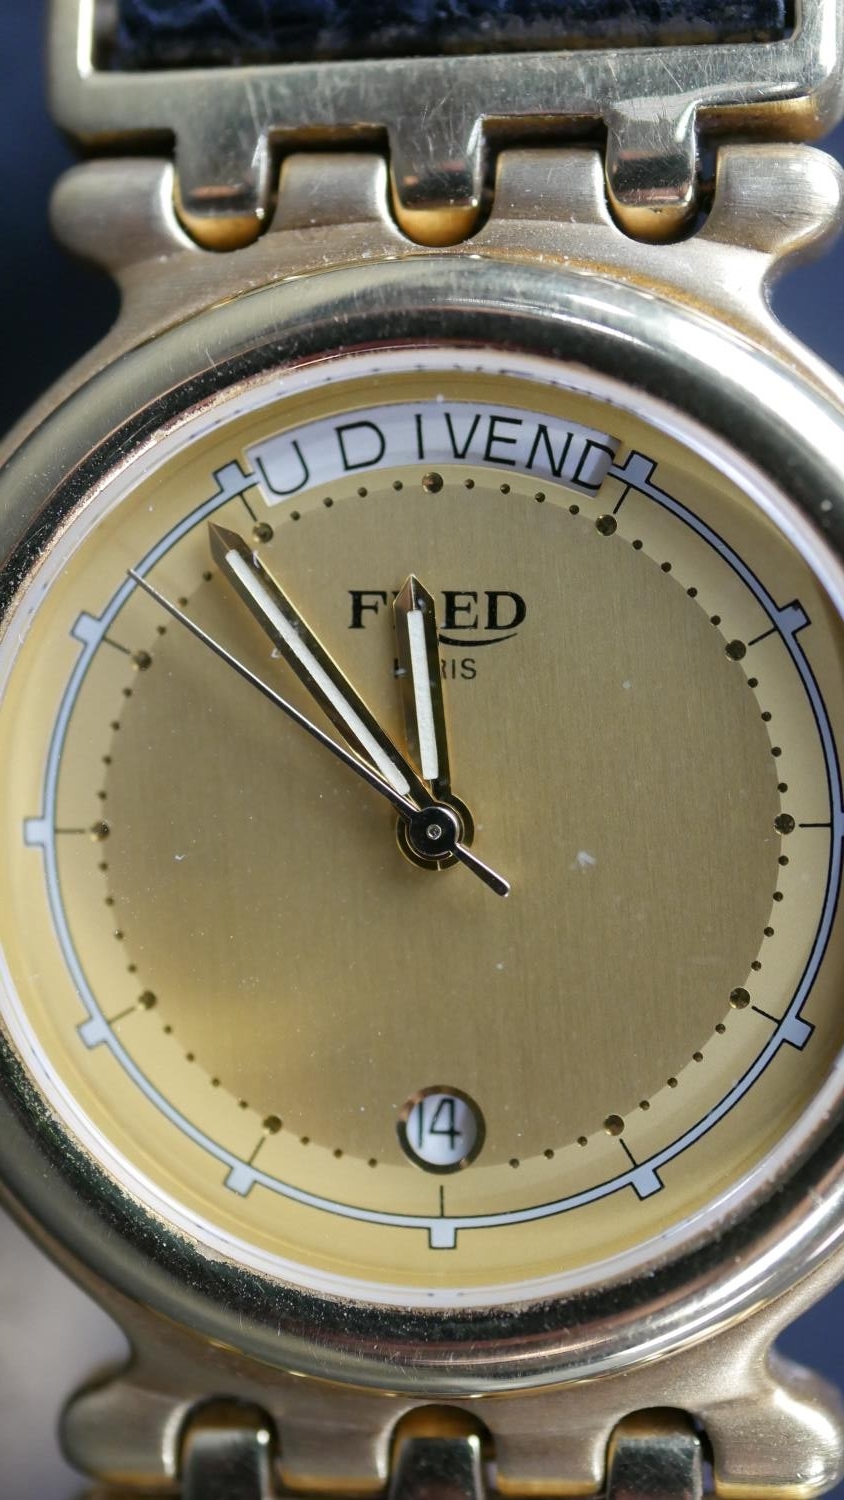 An 18 carat yellow gold ‘Tigresse’ watch, by Fred. Date and days of week aperture with leather - Image 2 of 8